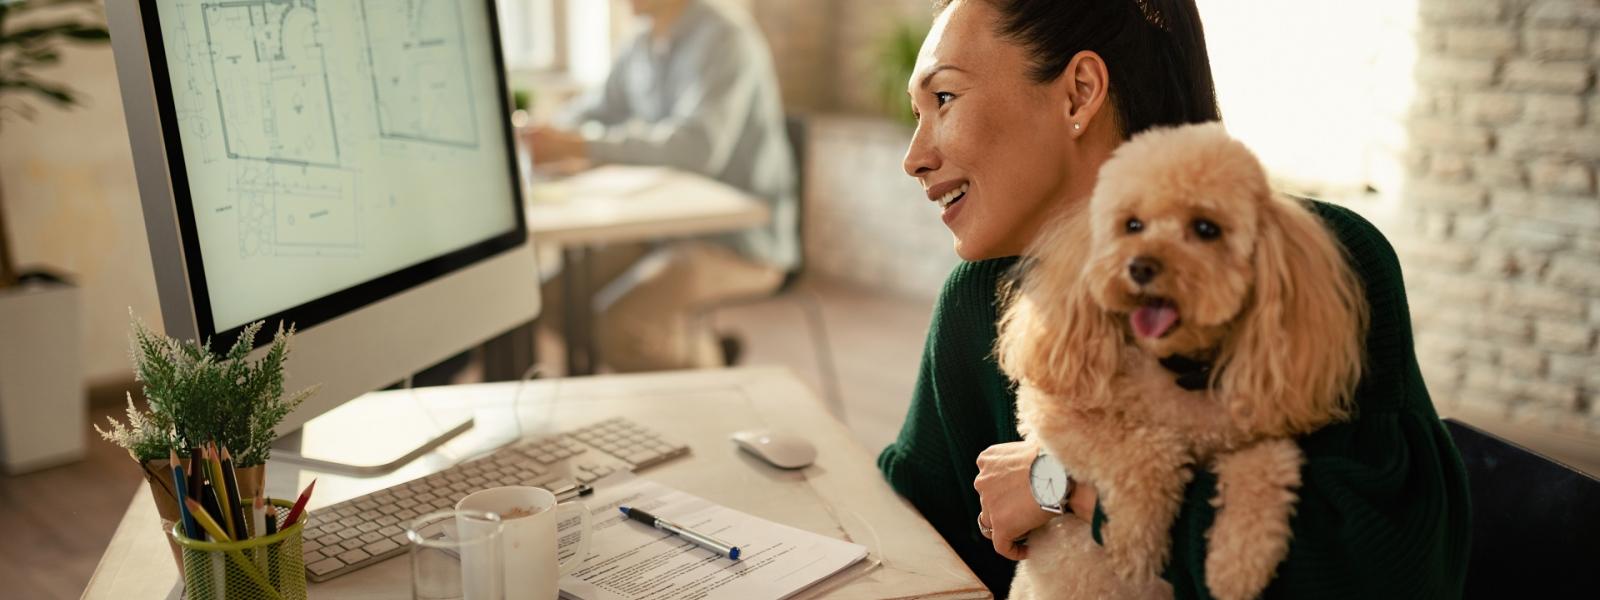 Woman at desk in office holding a dog